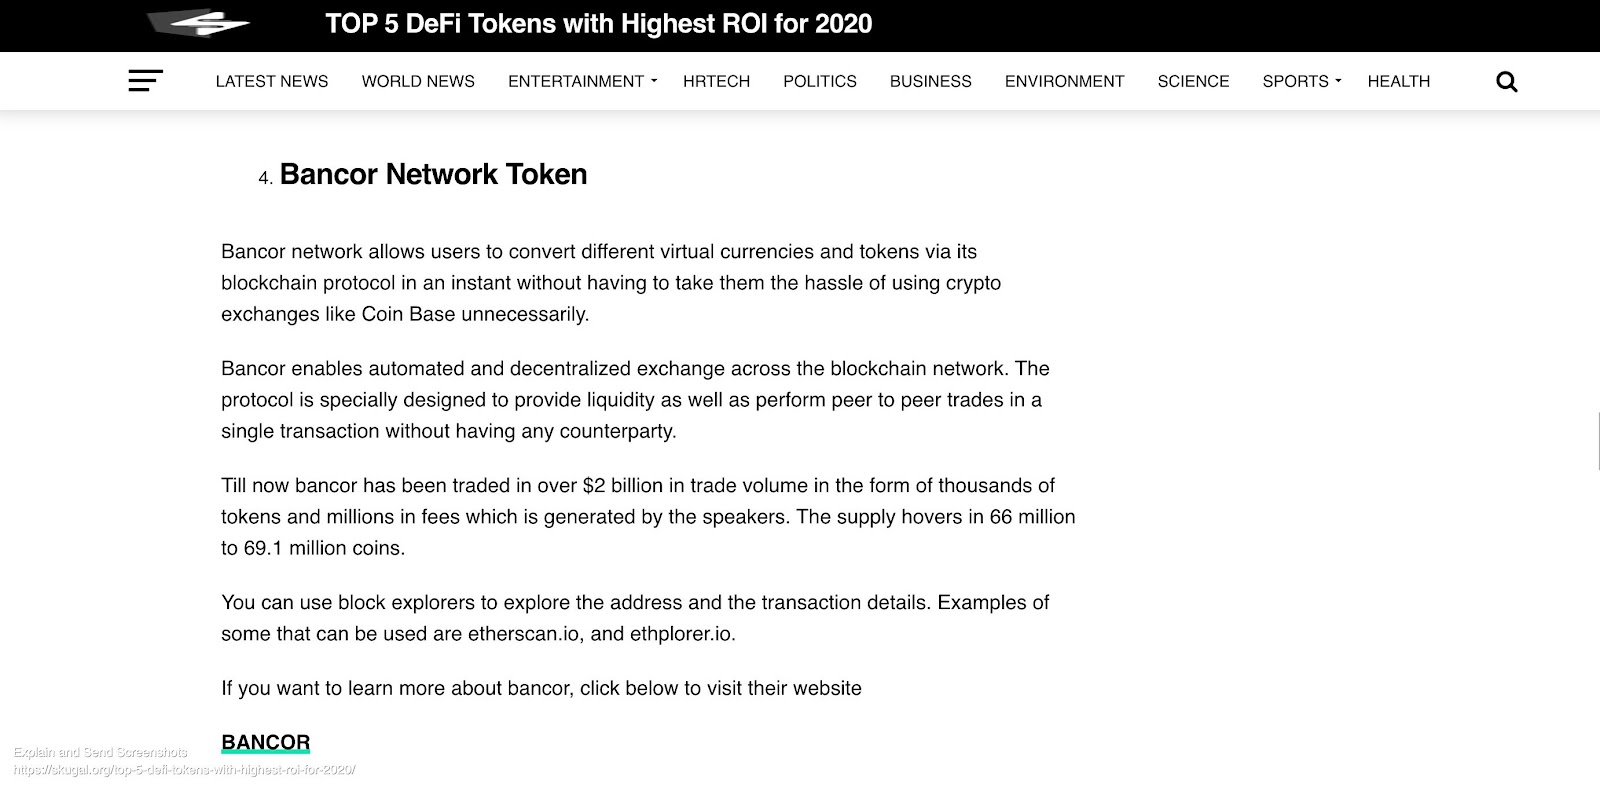 Top 5 Defi Tokens with Highest ROI for 2020